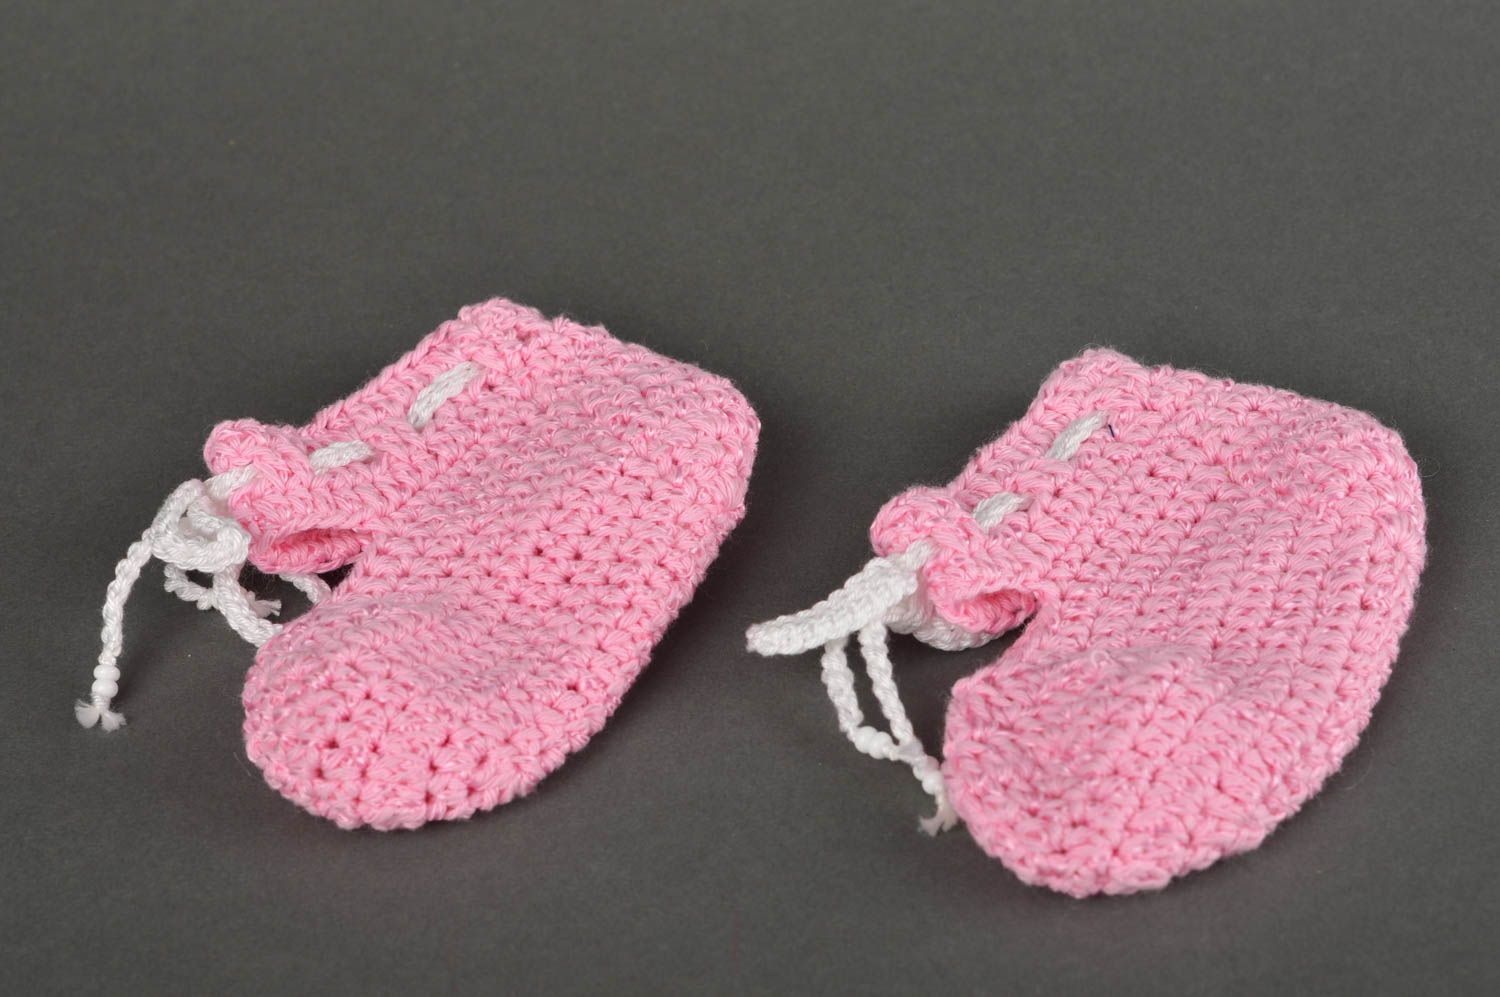 Handmade crocheted baby bootees unusual shoes for newborns stylish shoes photo 1